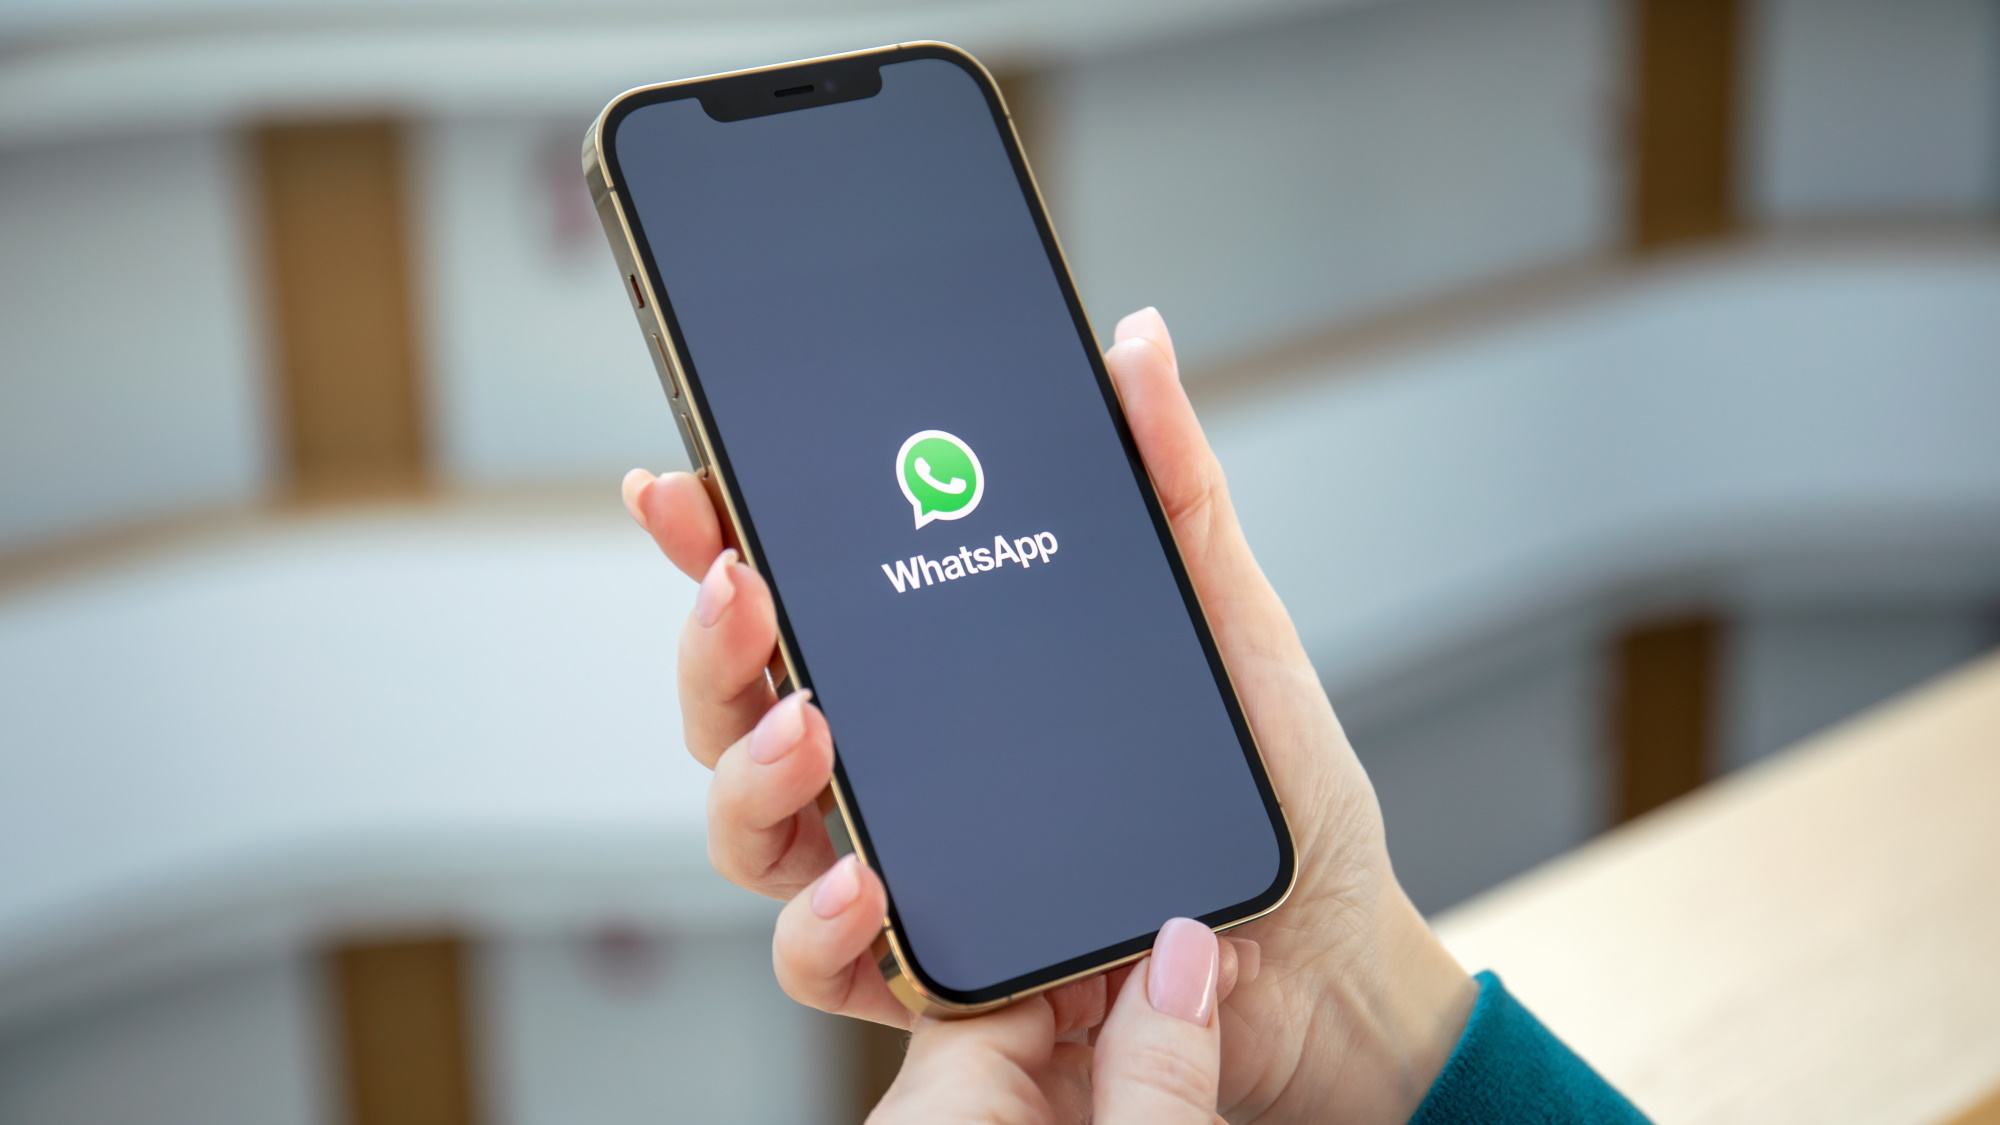 New features of WhatsApp for iOS;  Hide last visited and online status